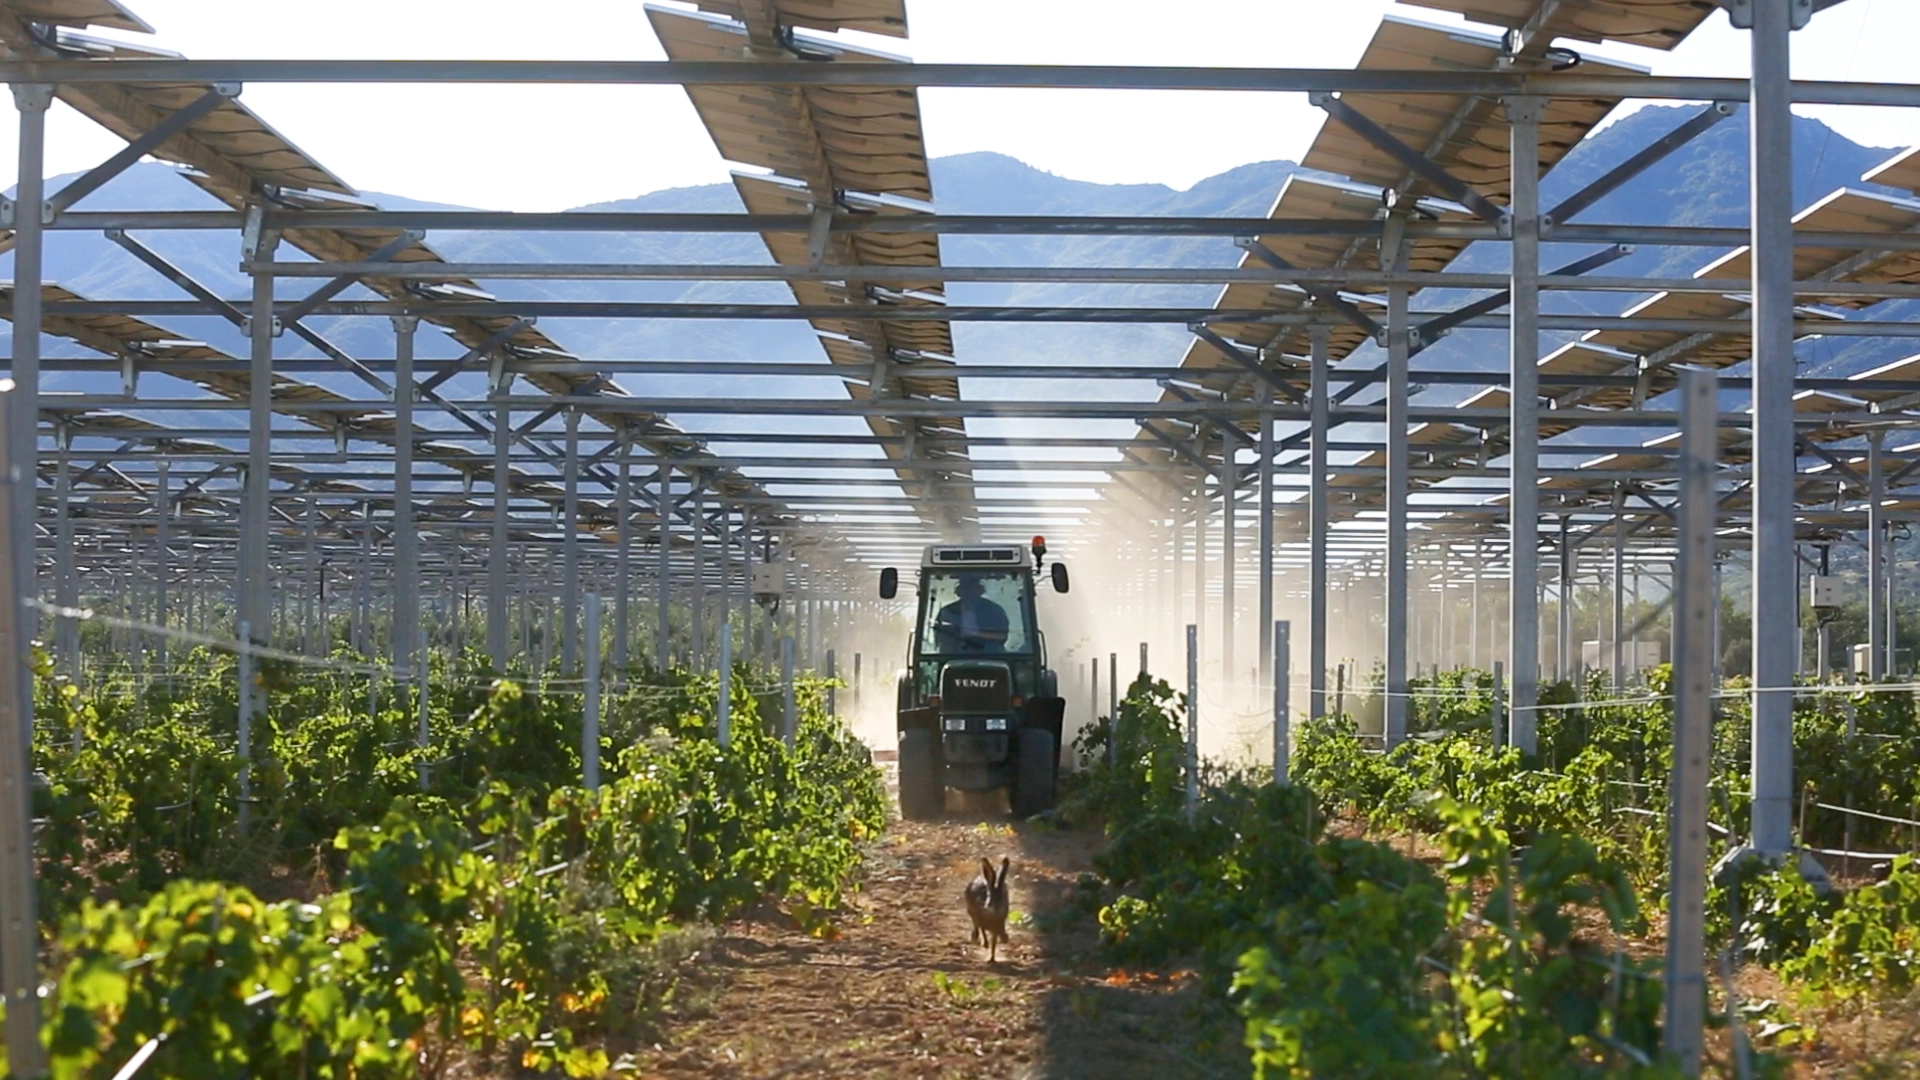 Featured image for “Article: How Solar Panels Could Help Save Struggling Farms”